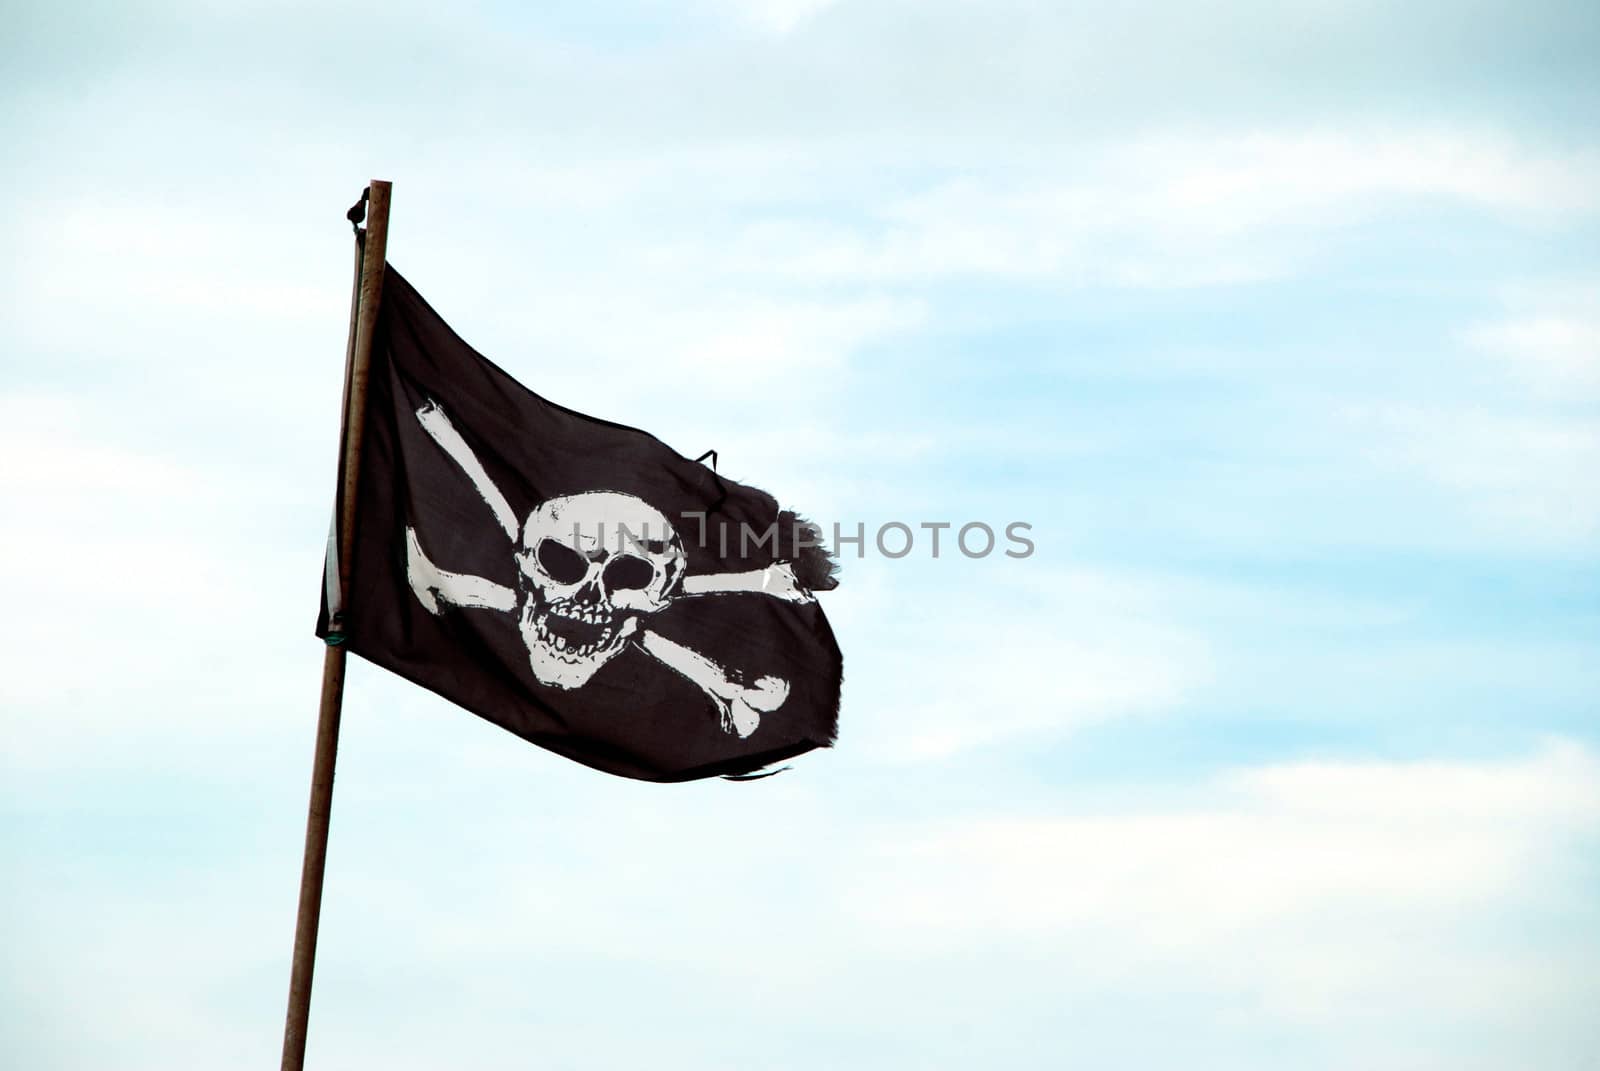 Ragged pirate flag with skull and crossbones flying from flagpole